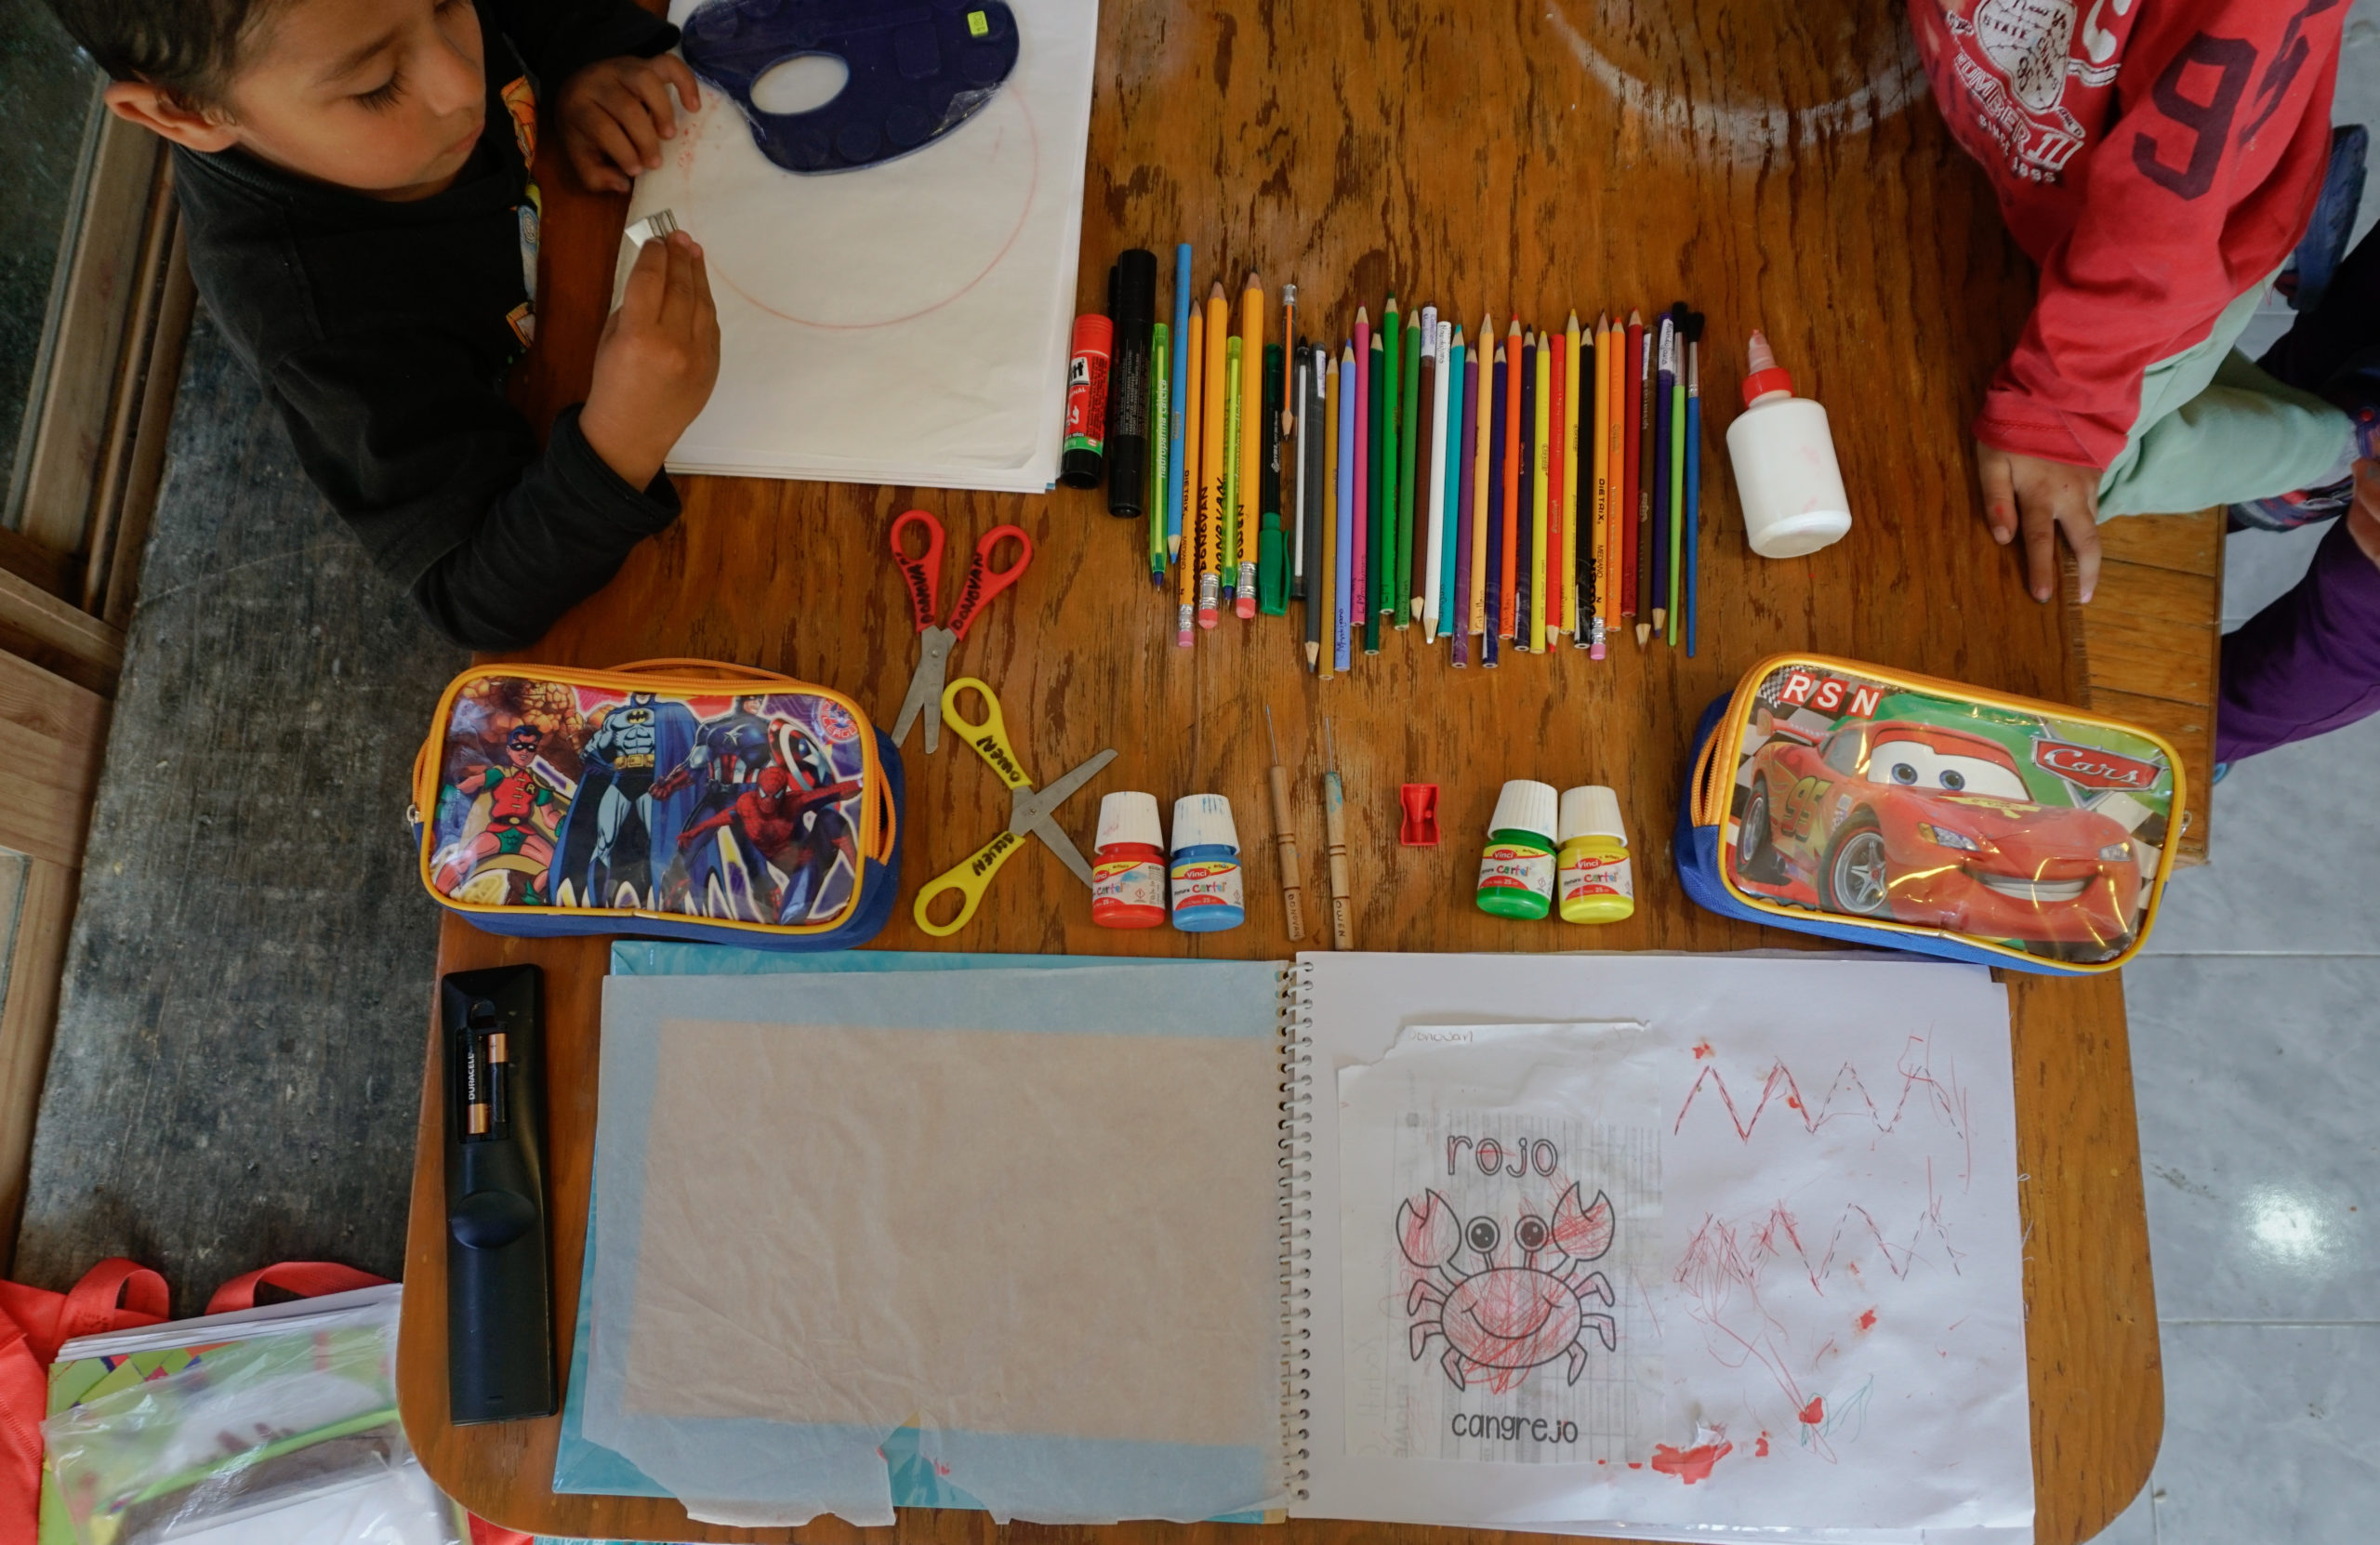 An array of school supplies including cartoon pencil cases, pencils and pencils and other sundries, surround a kid's drawing on a desk.